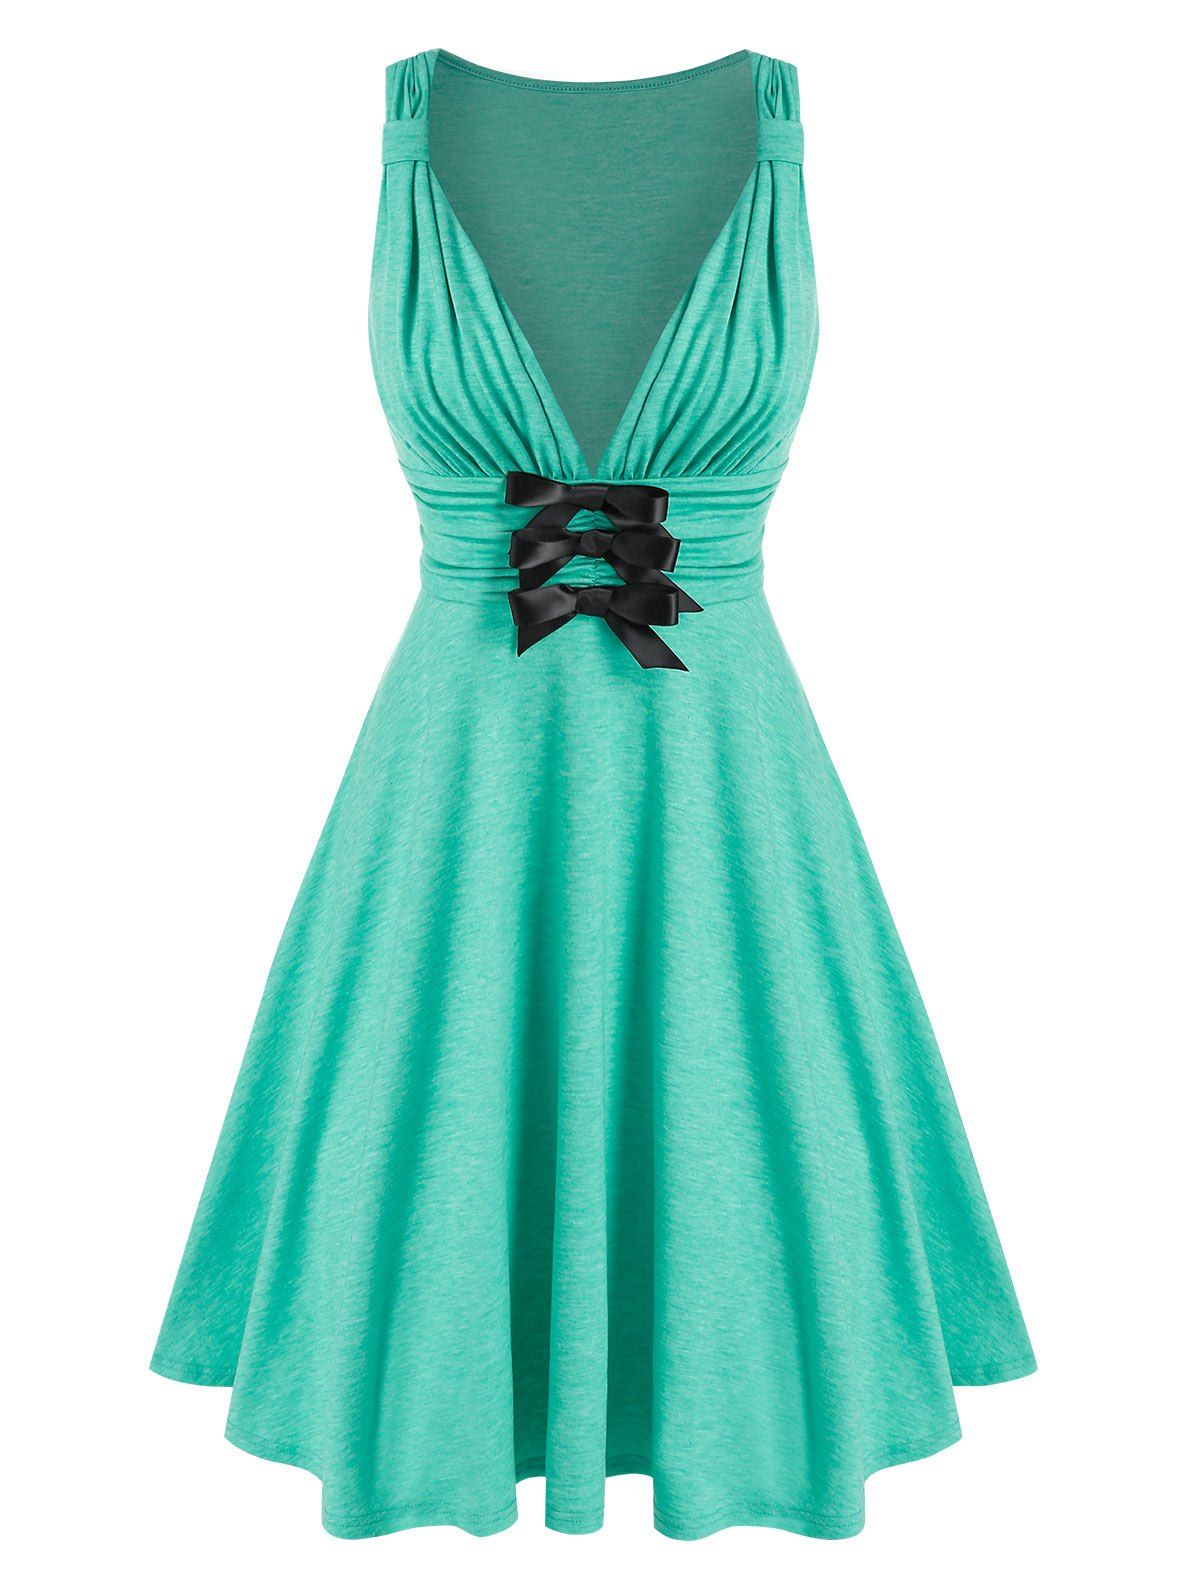 Plunging Neck A Line Dress Ruched Bowknot Wide Waist Party Fit And Flare Dress - GREEN XXXL